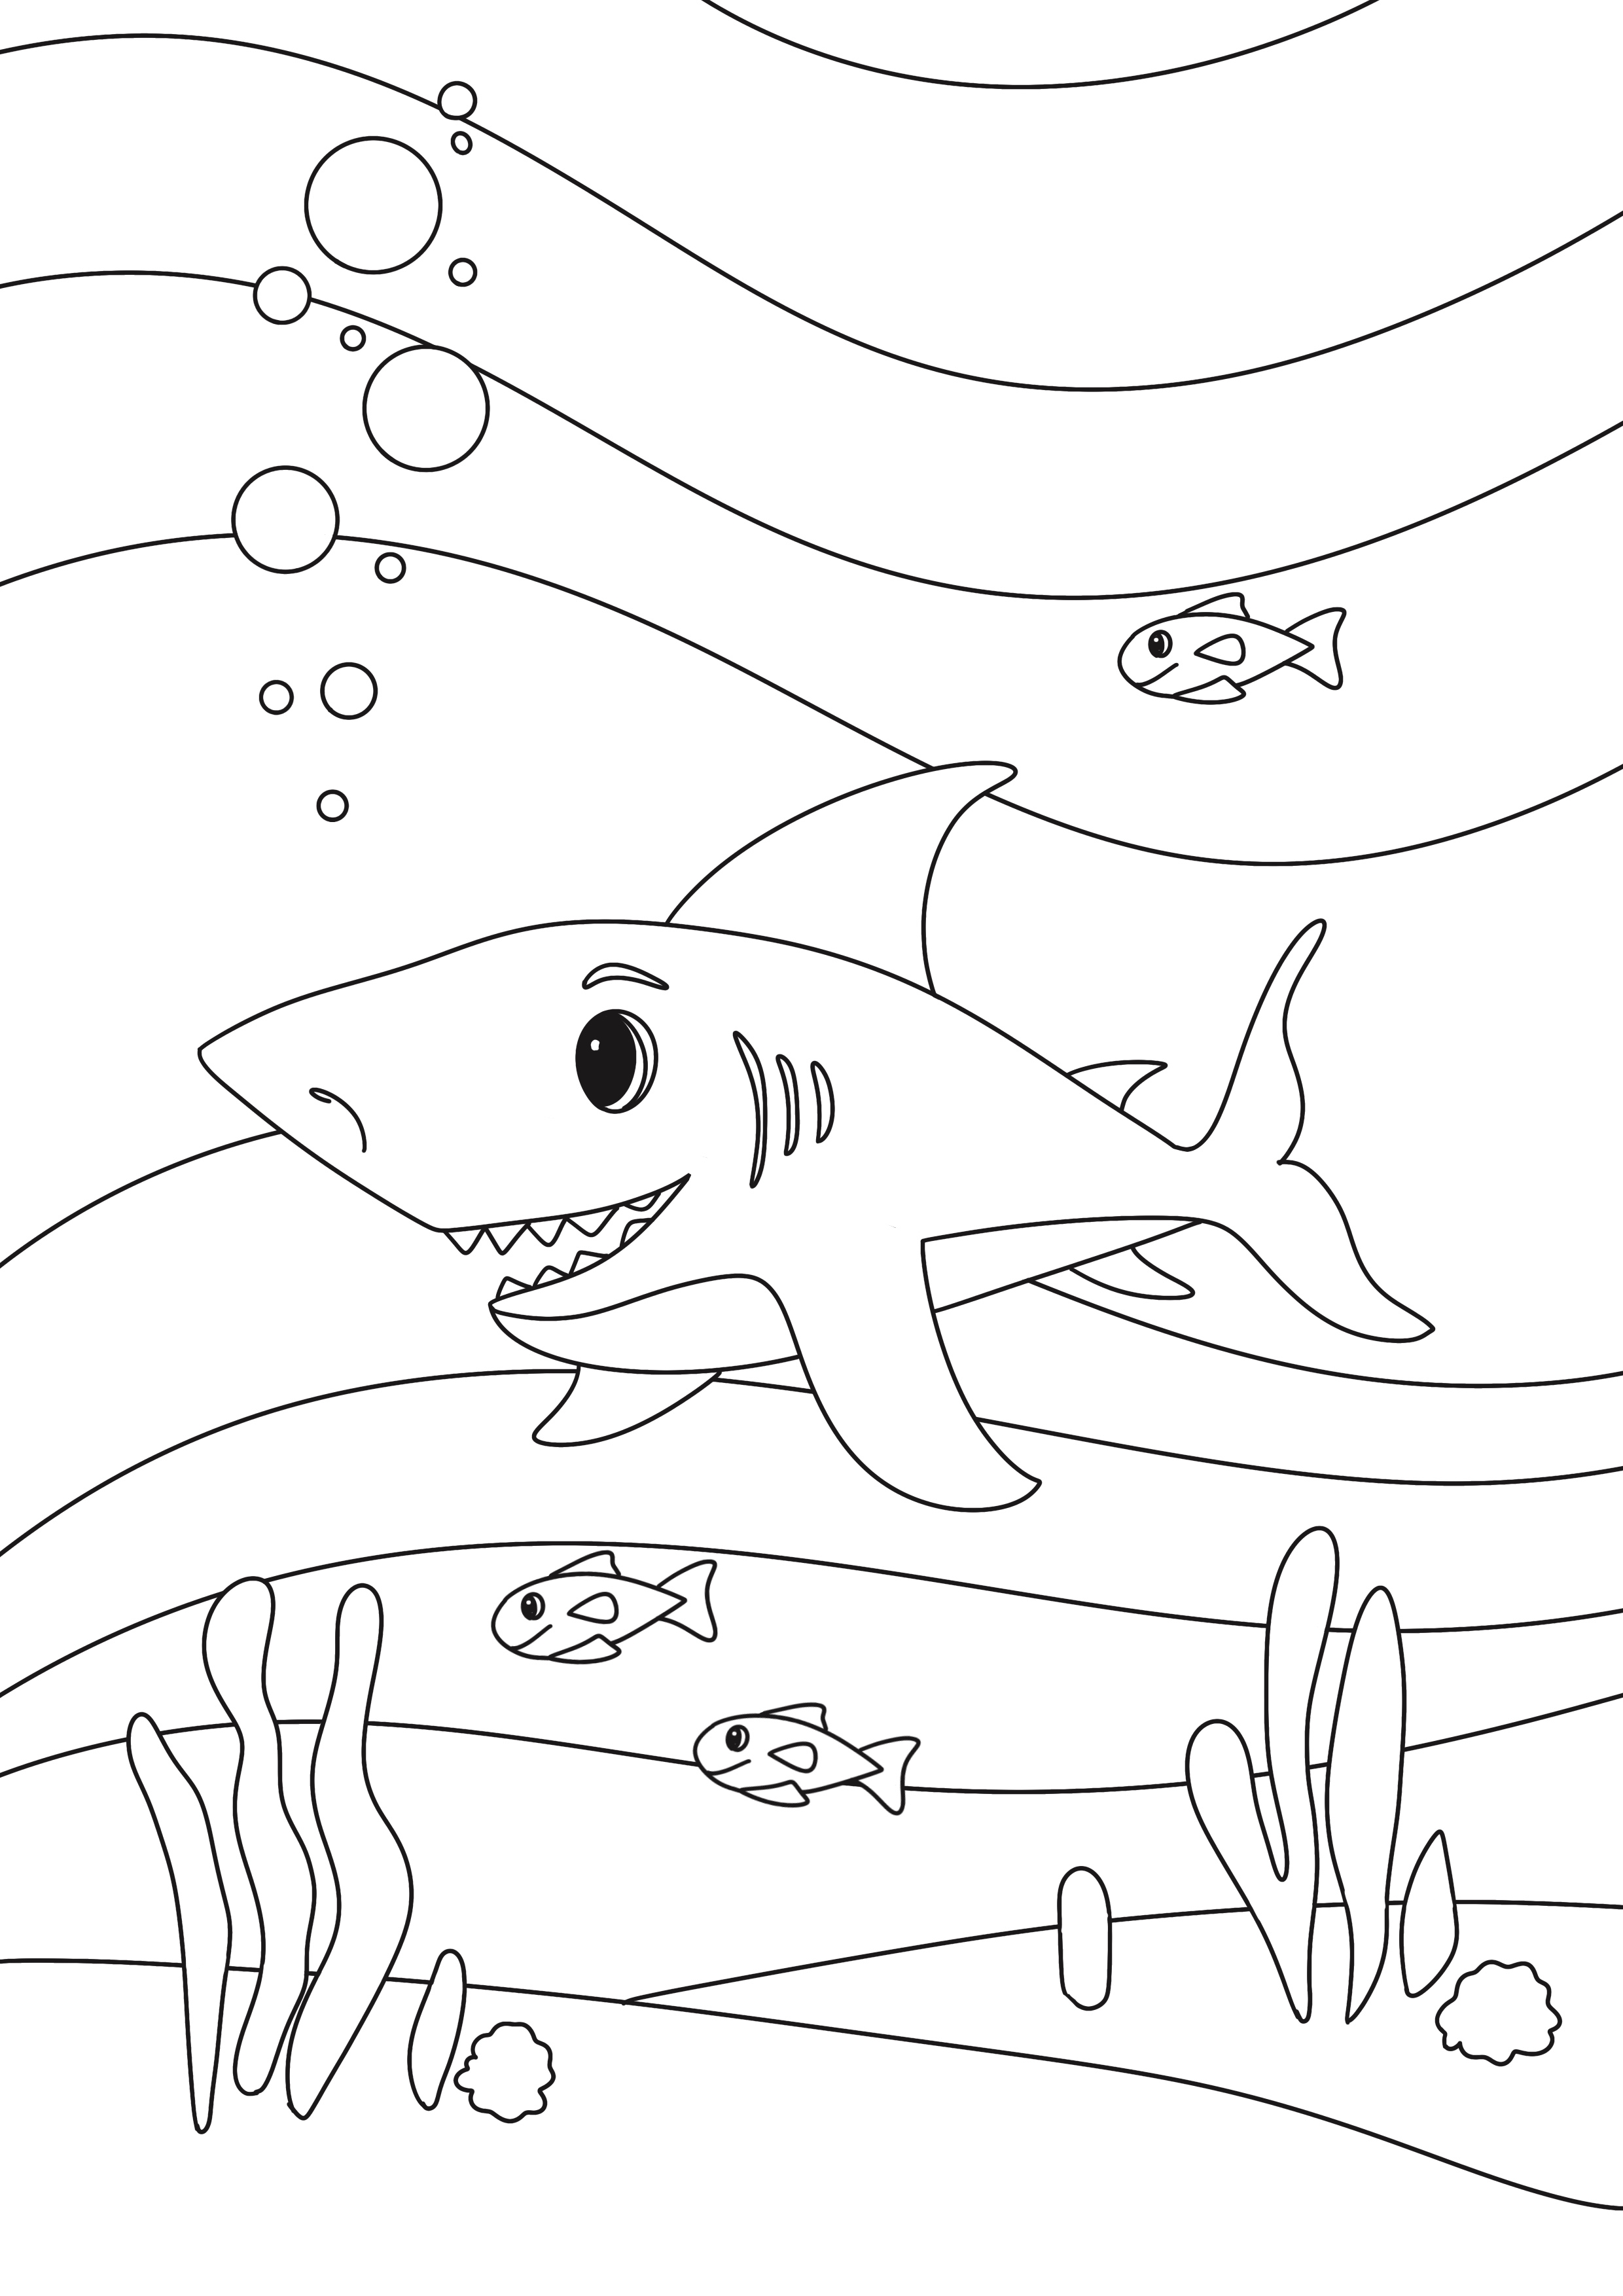 Kids Free Coloring Printables - Aimee Gray Illustration